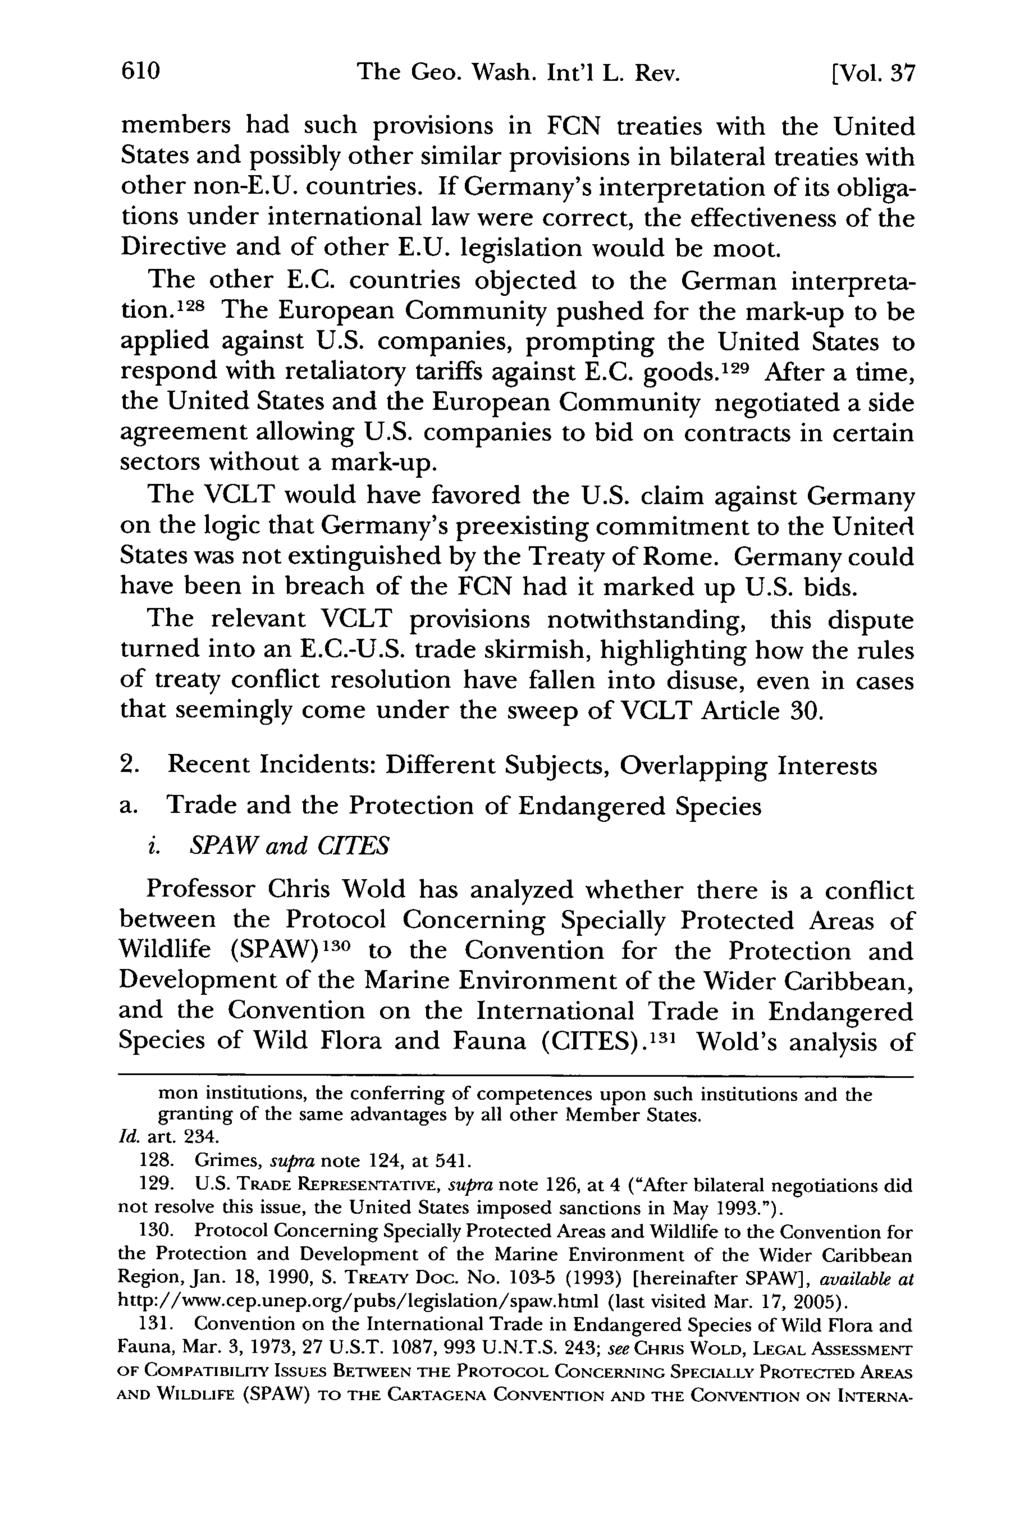 The Geo. Wash. Int'l L. Rev. [Vol. 37 members had such provisions in FCN treaties with the United States and possibly other similar provisions in bilateral treaties with other non-e.u. countries.